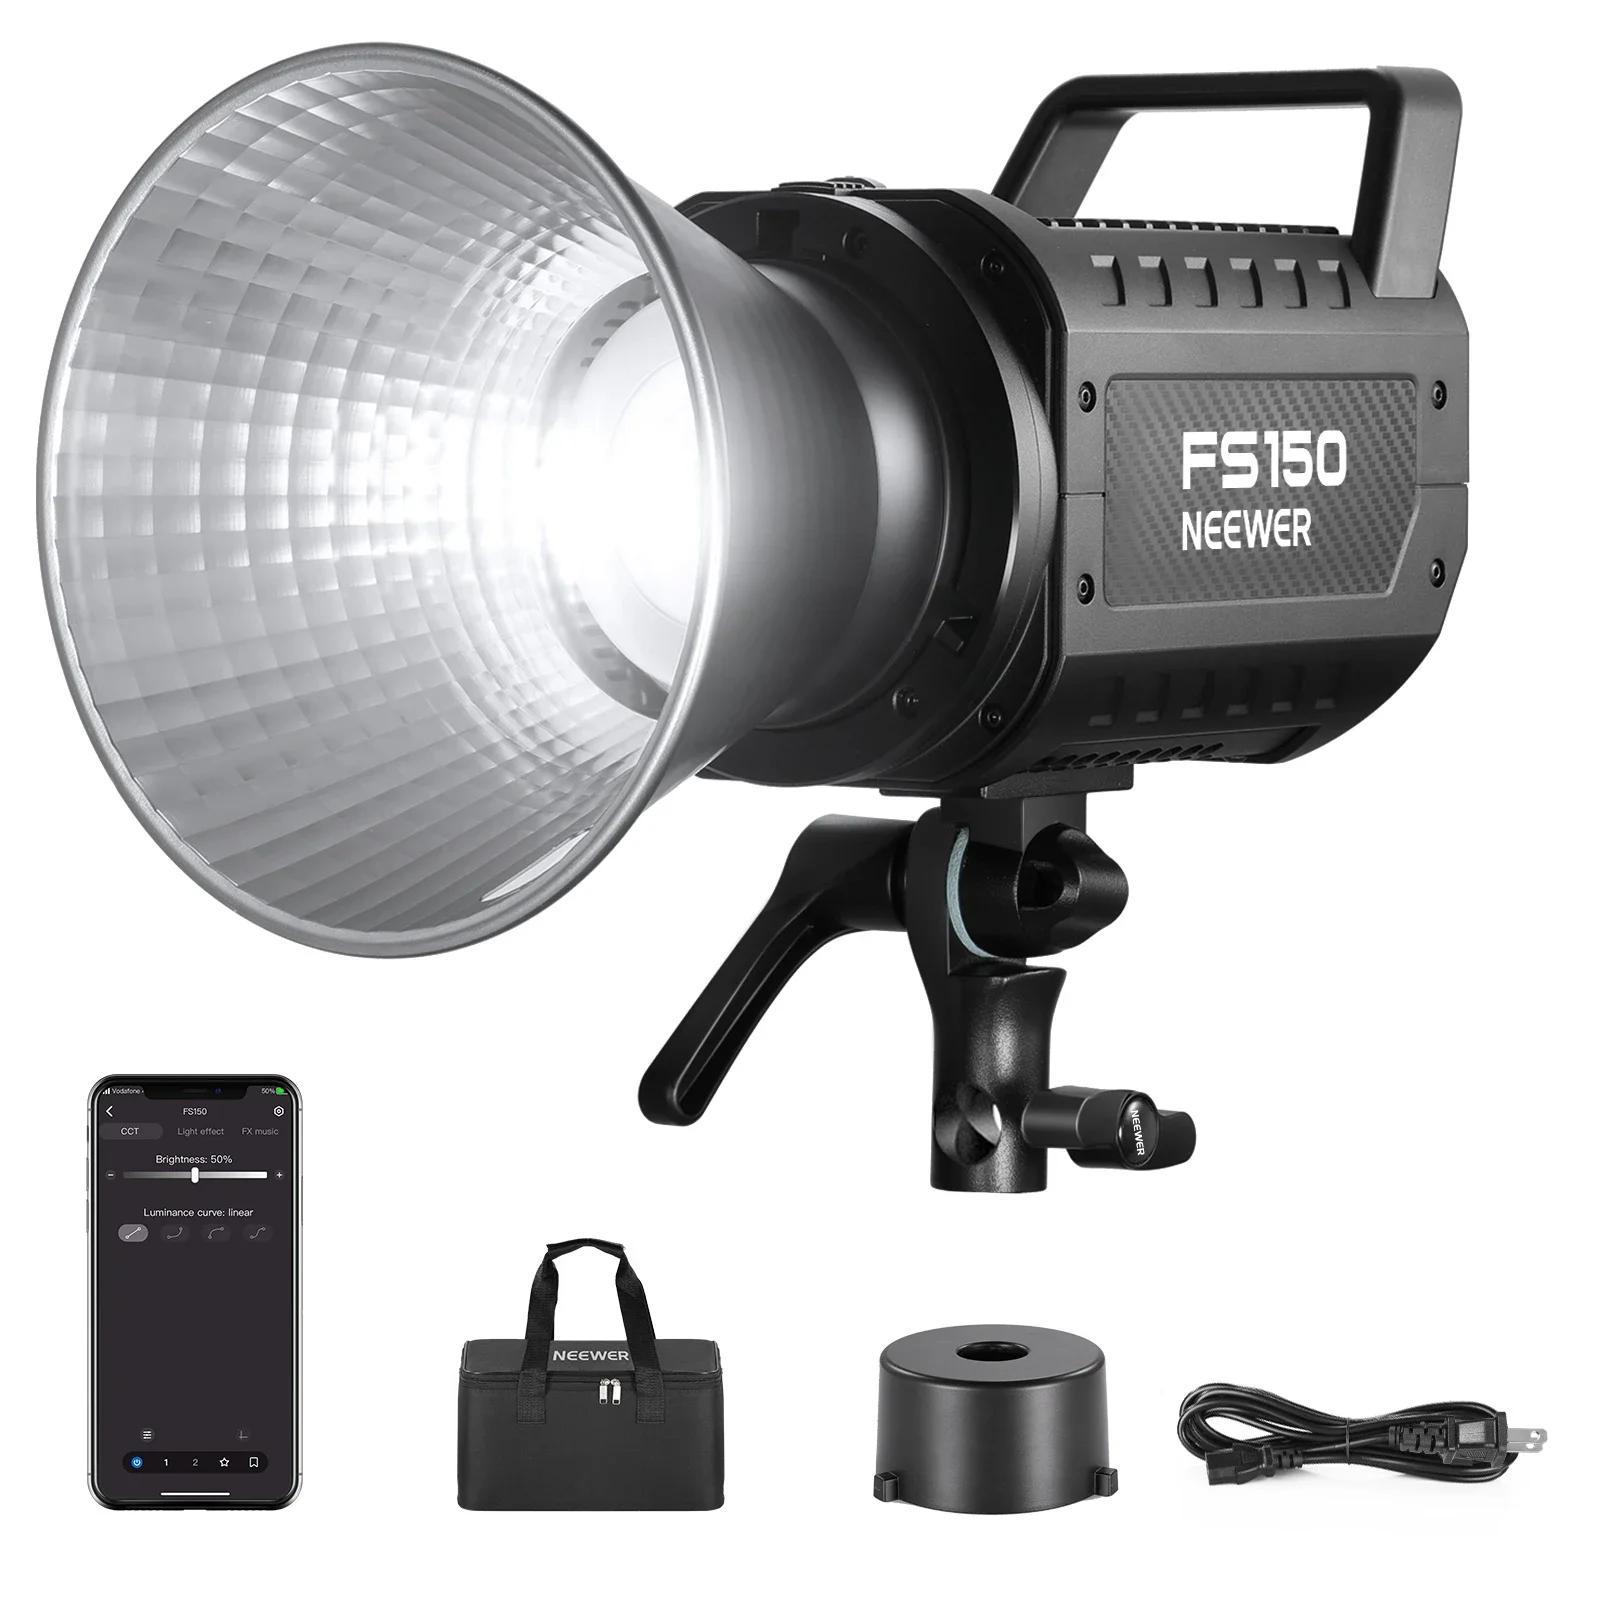 

NEEWER FS150 LED Video Light 2.4G/APP Control, 130W 5600K COB Daylight Silent Photography Continuous Output Lighting 4 Precise